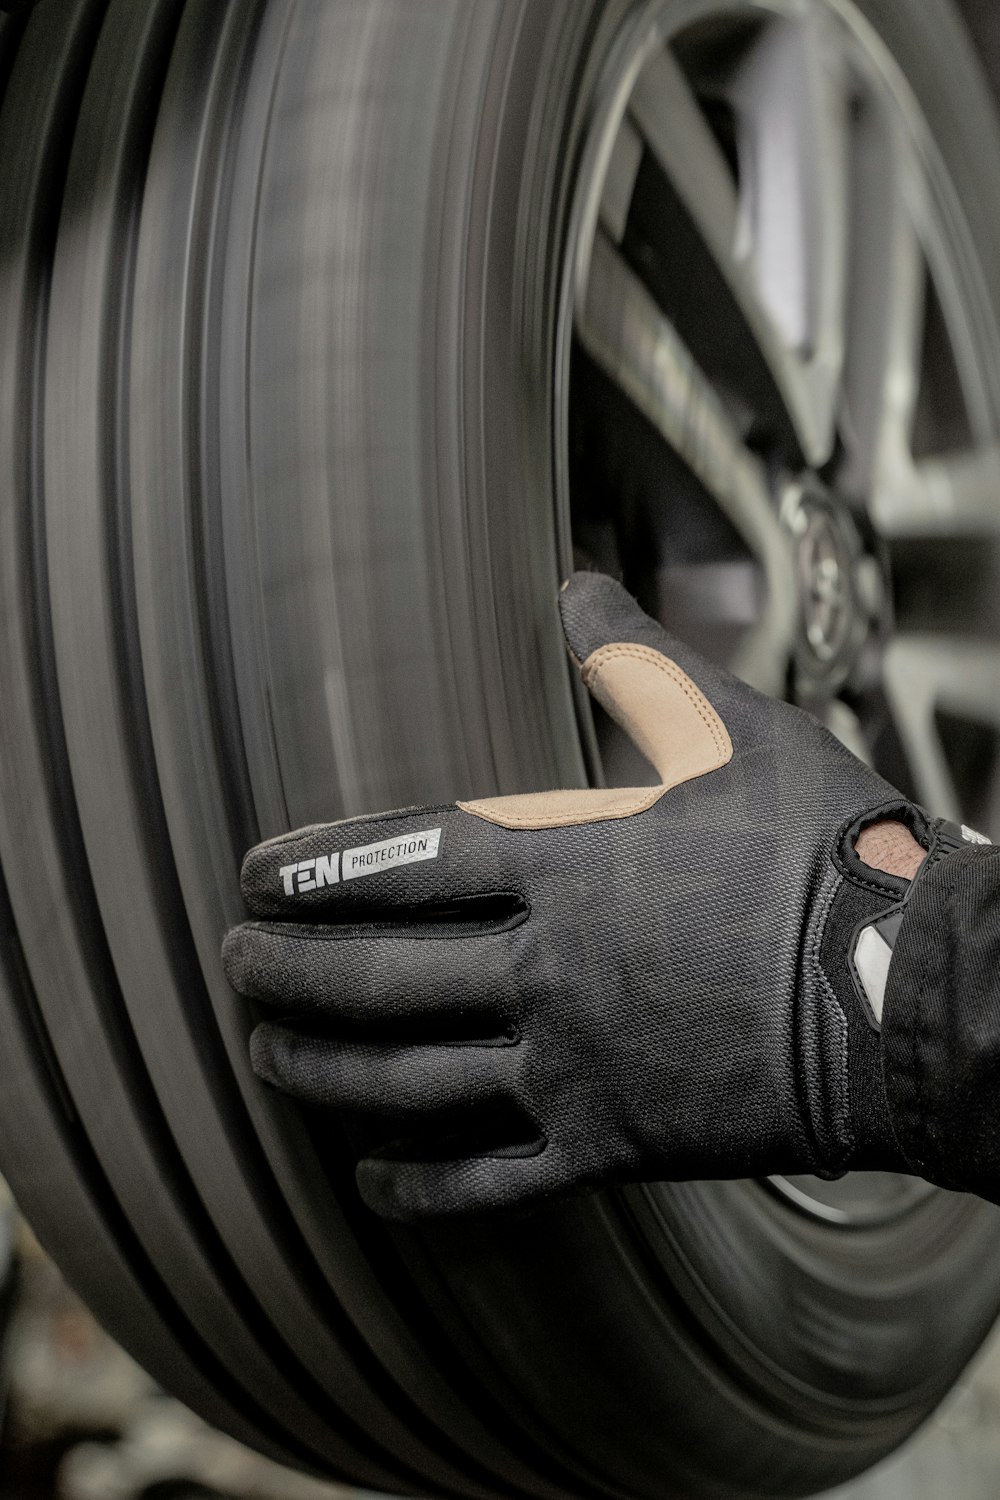 a close up of a person wearing a glove on a tire